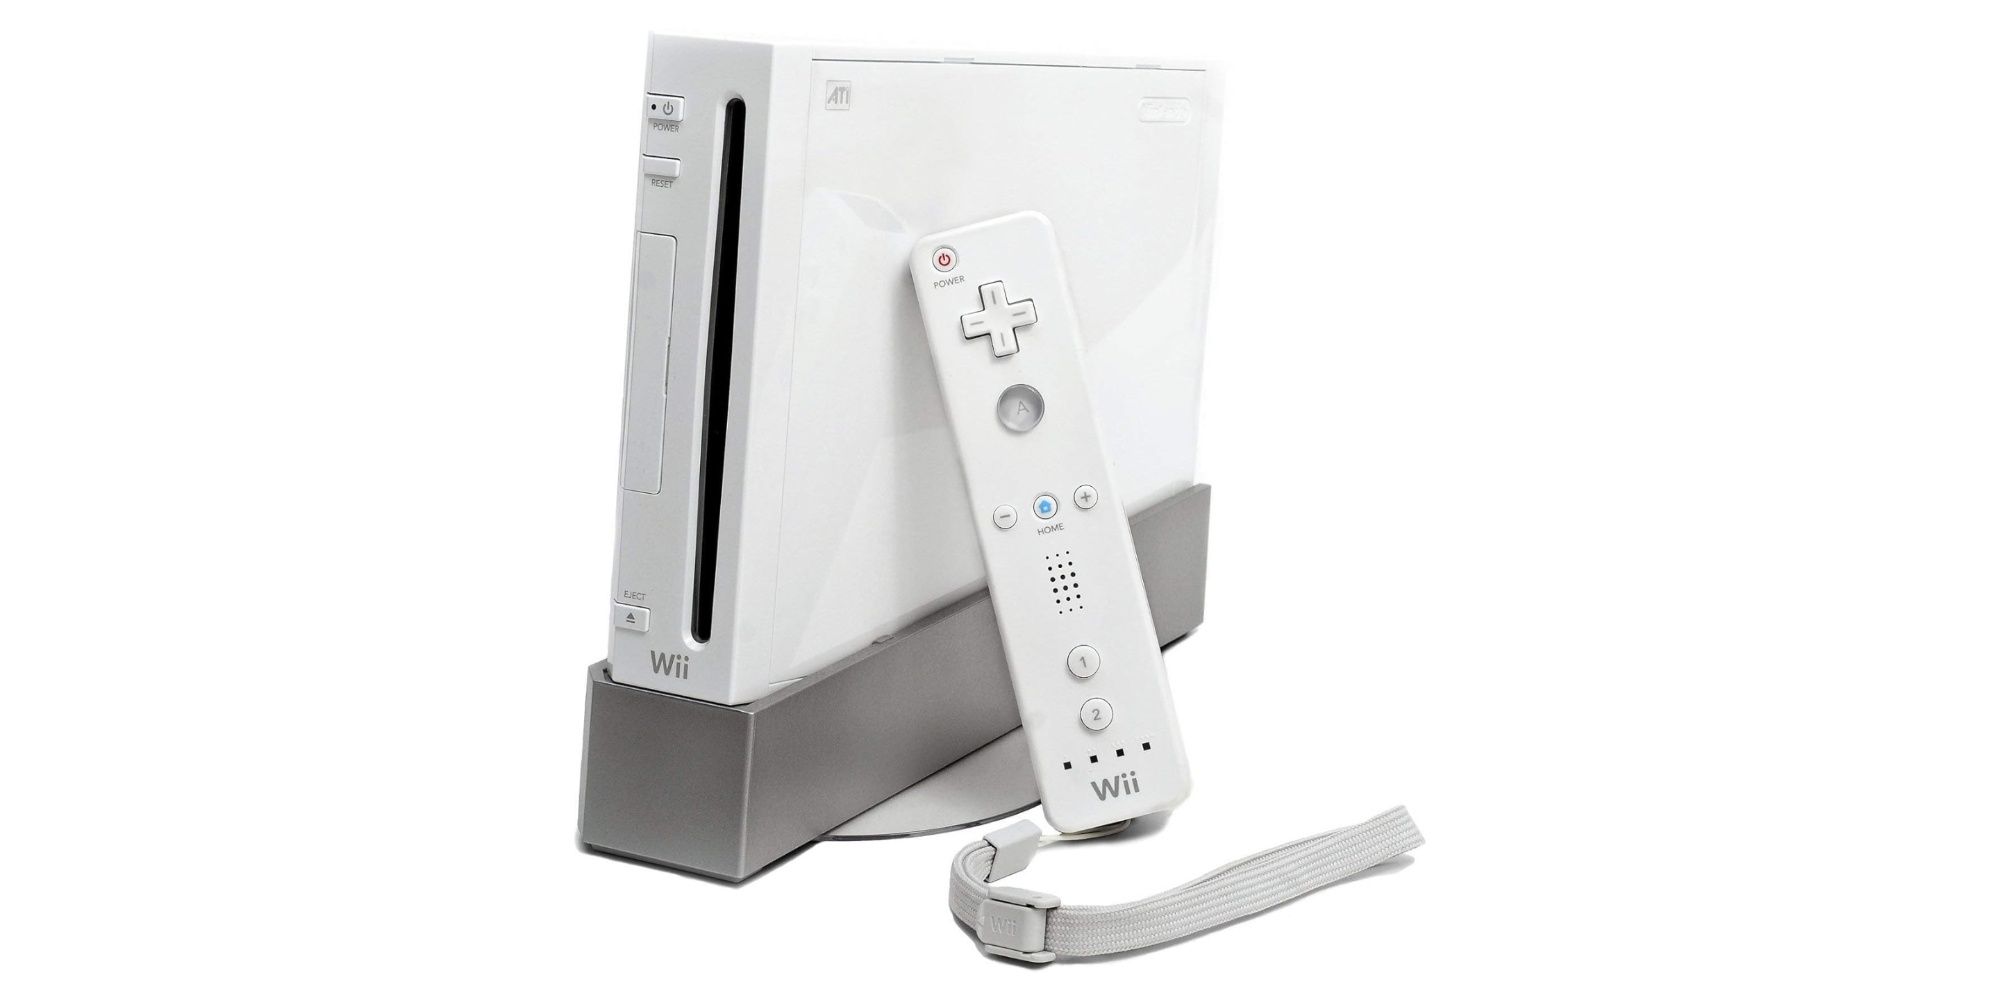 A pitcure of the wii console on a white background